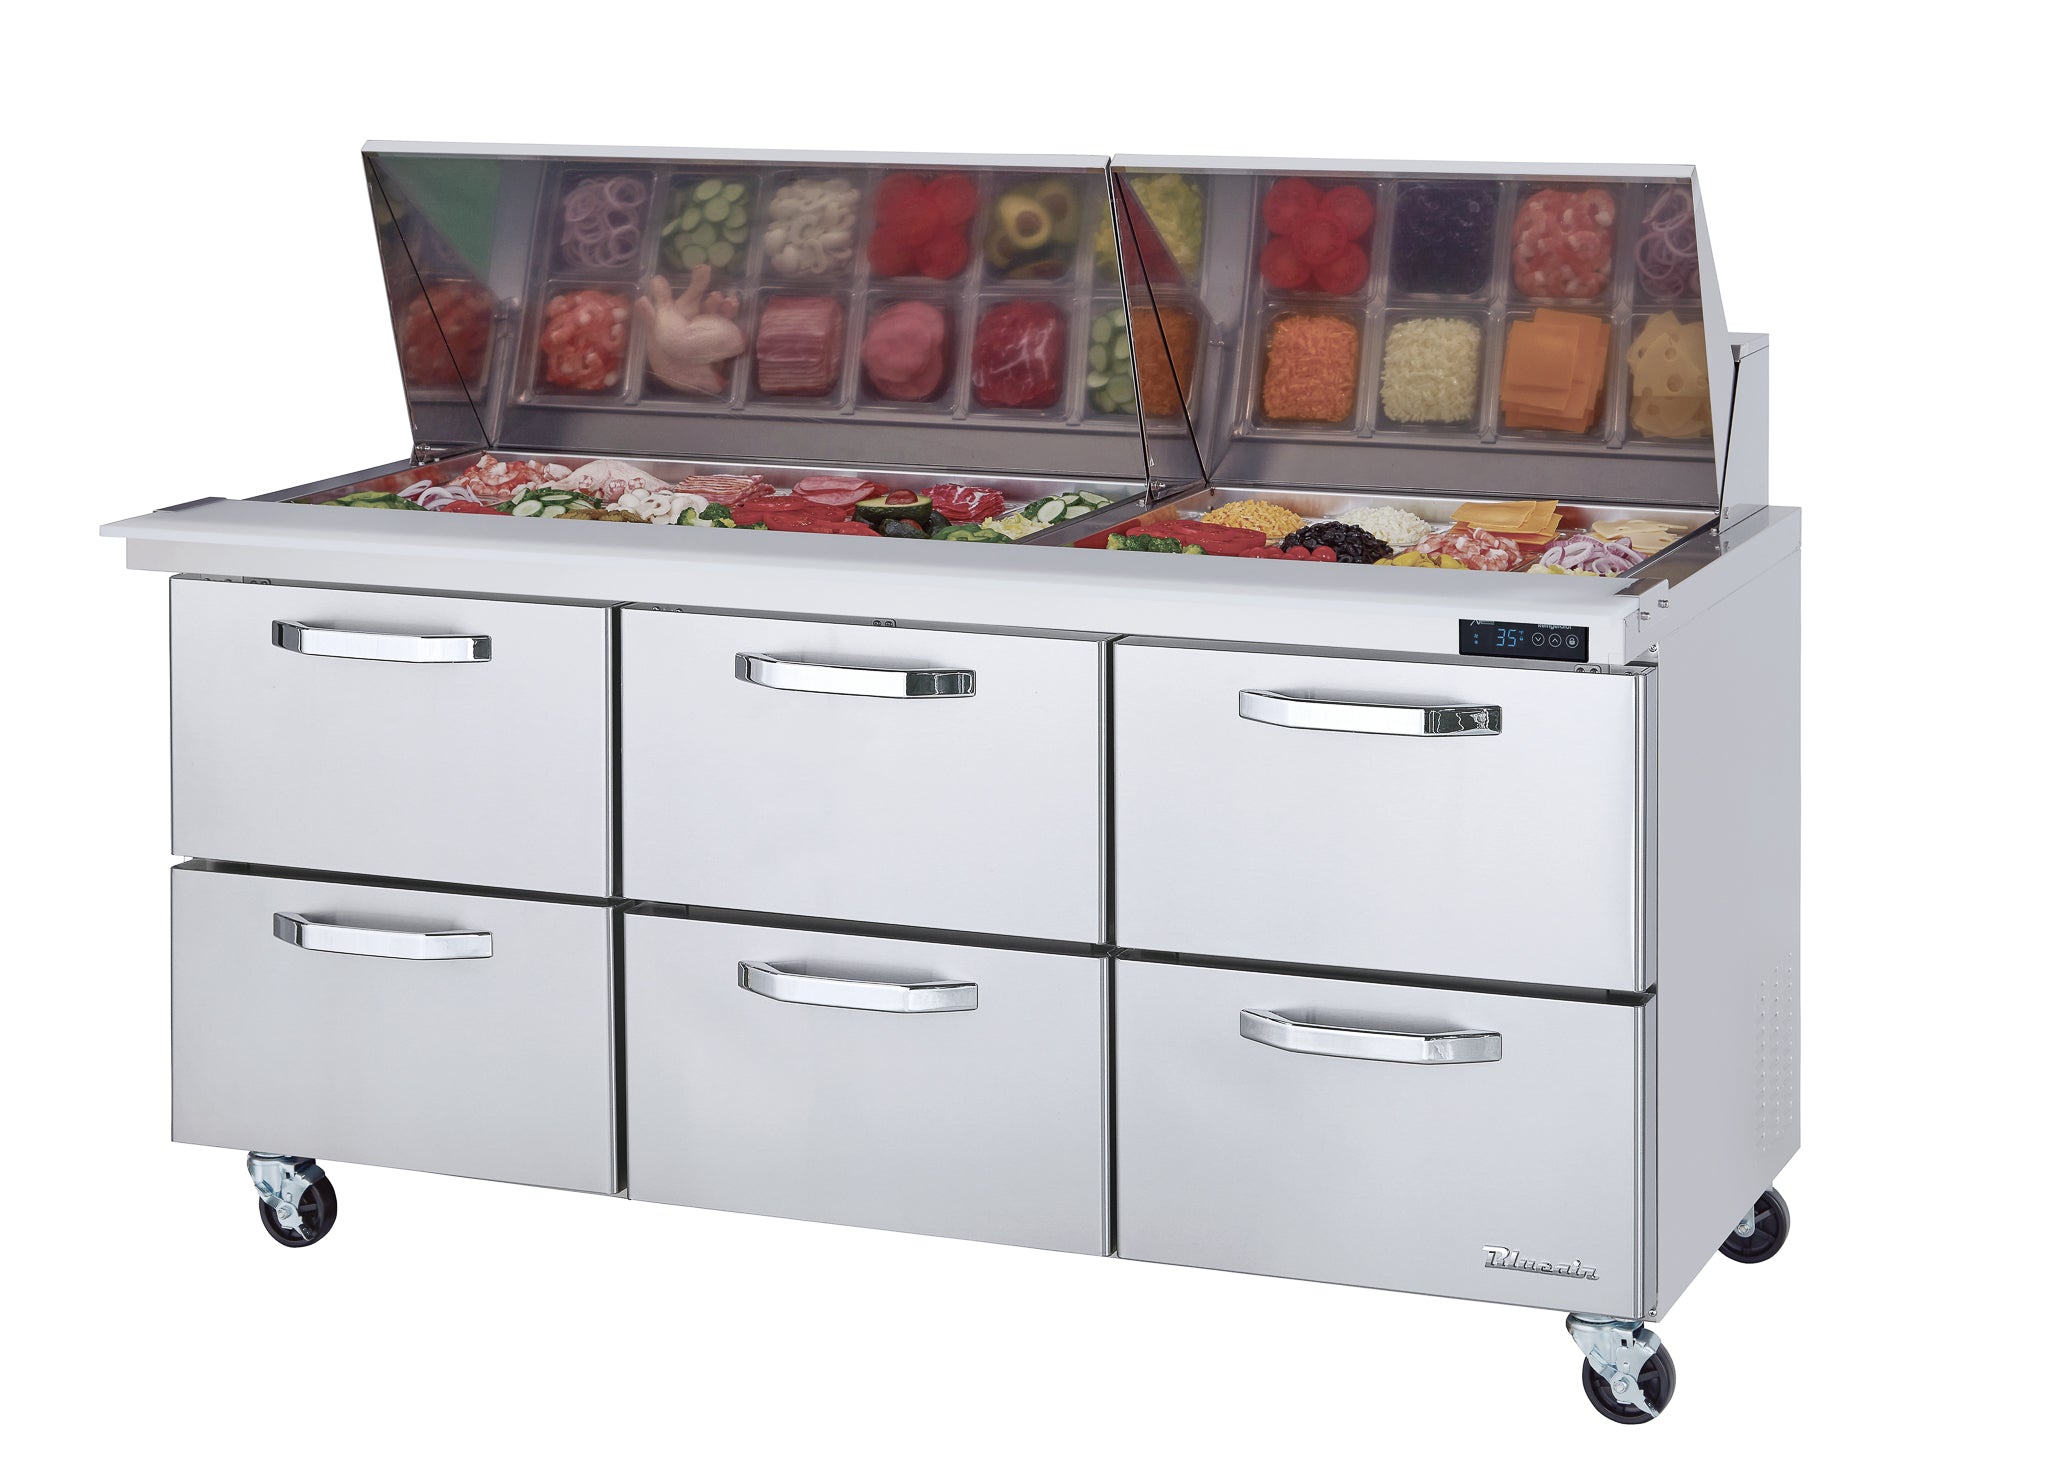 Blue Air - BLMT72-D6-HC, 6 Drawers All Stainless Prep Table with (30) 1/6 Pans - 72" wide, 20 cu/ft, R-290 Refrigerant